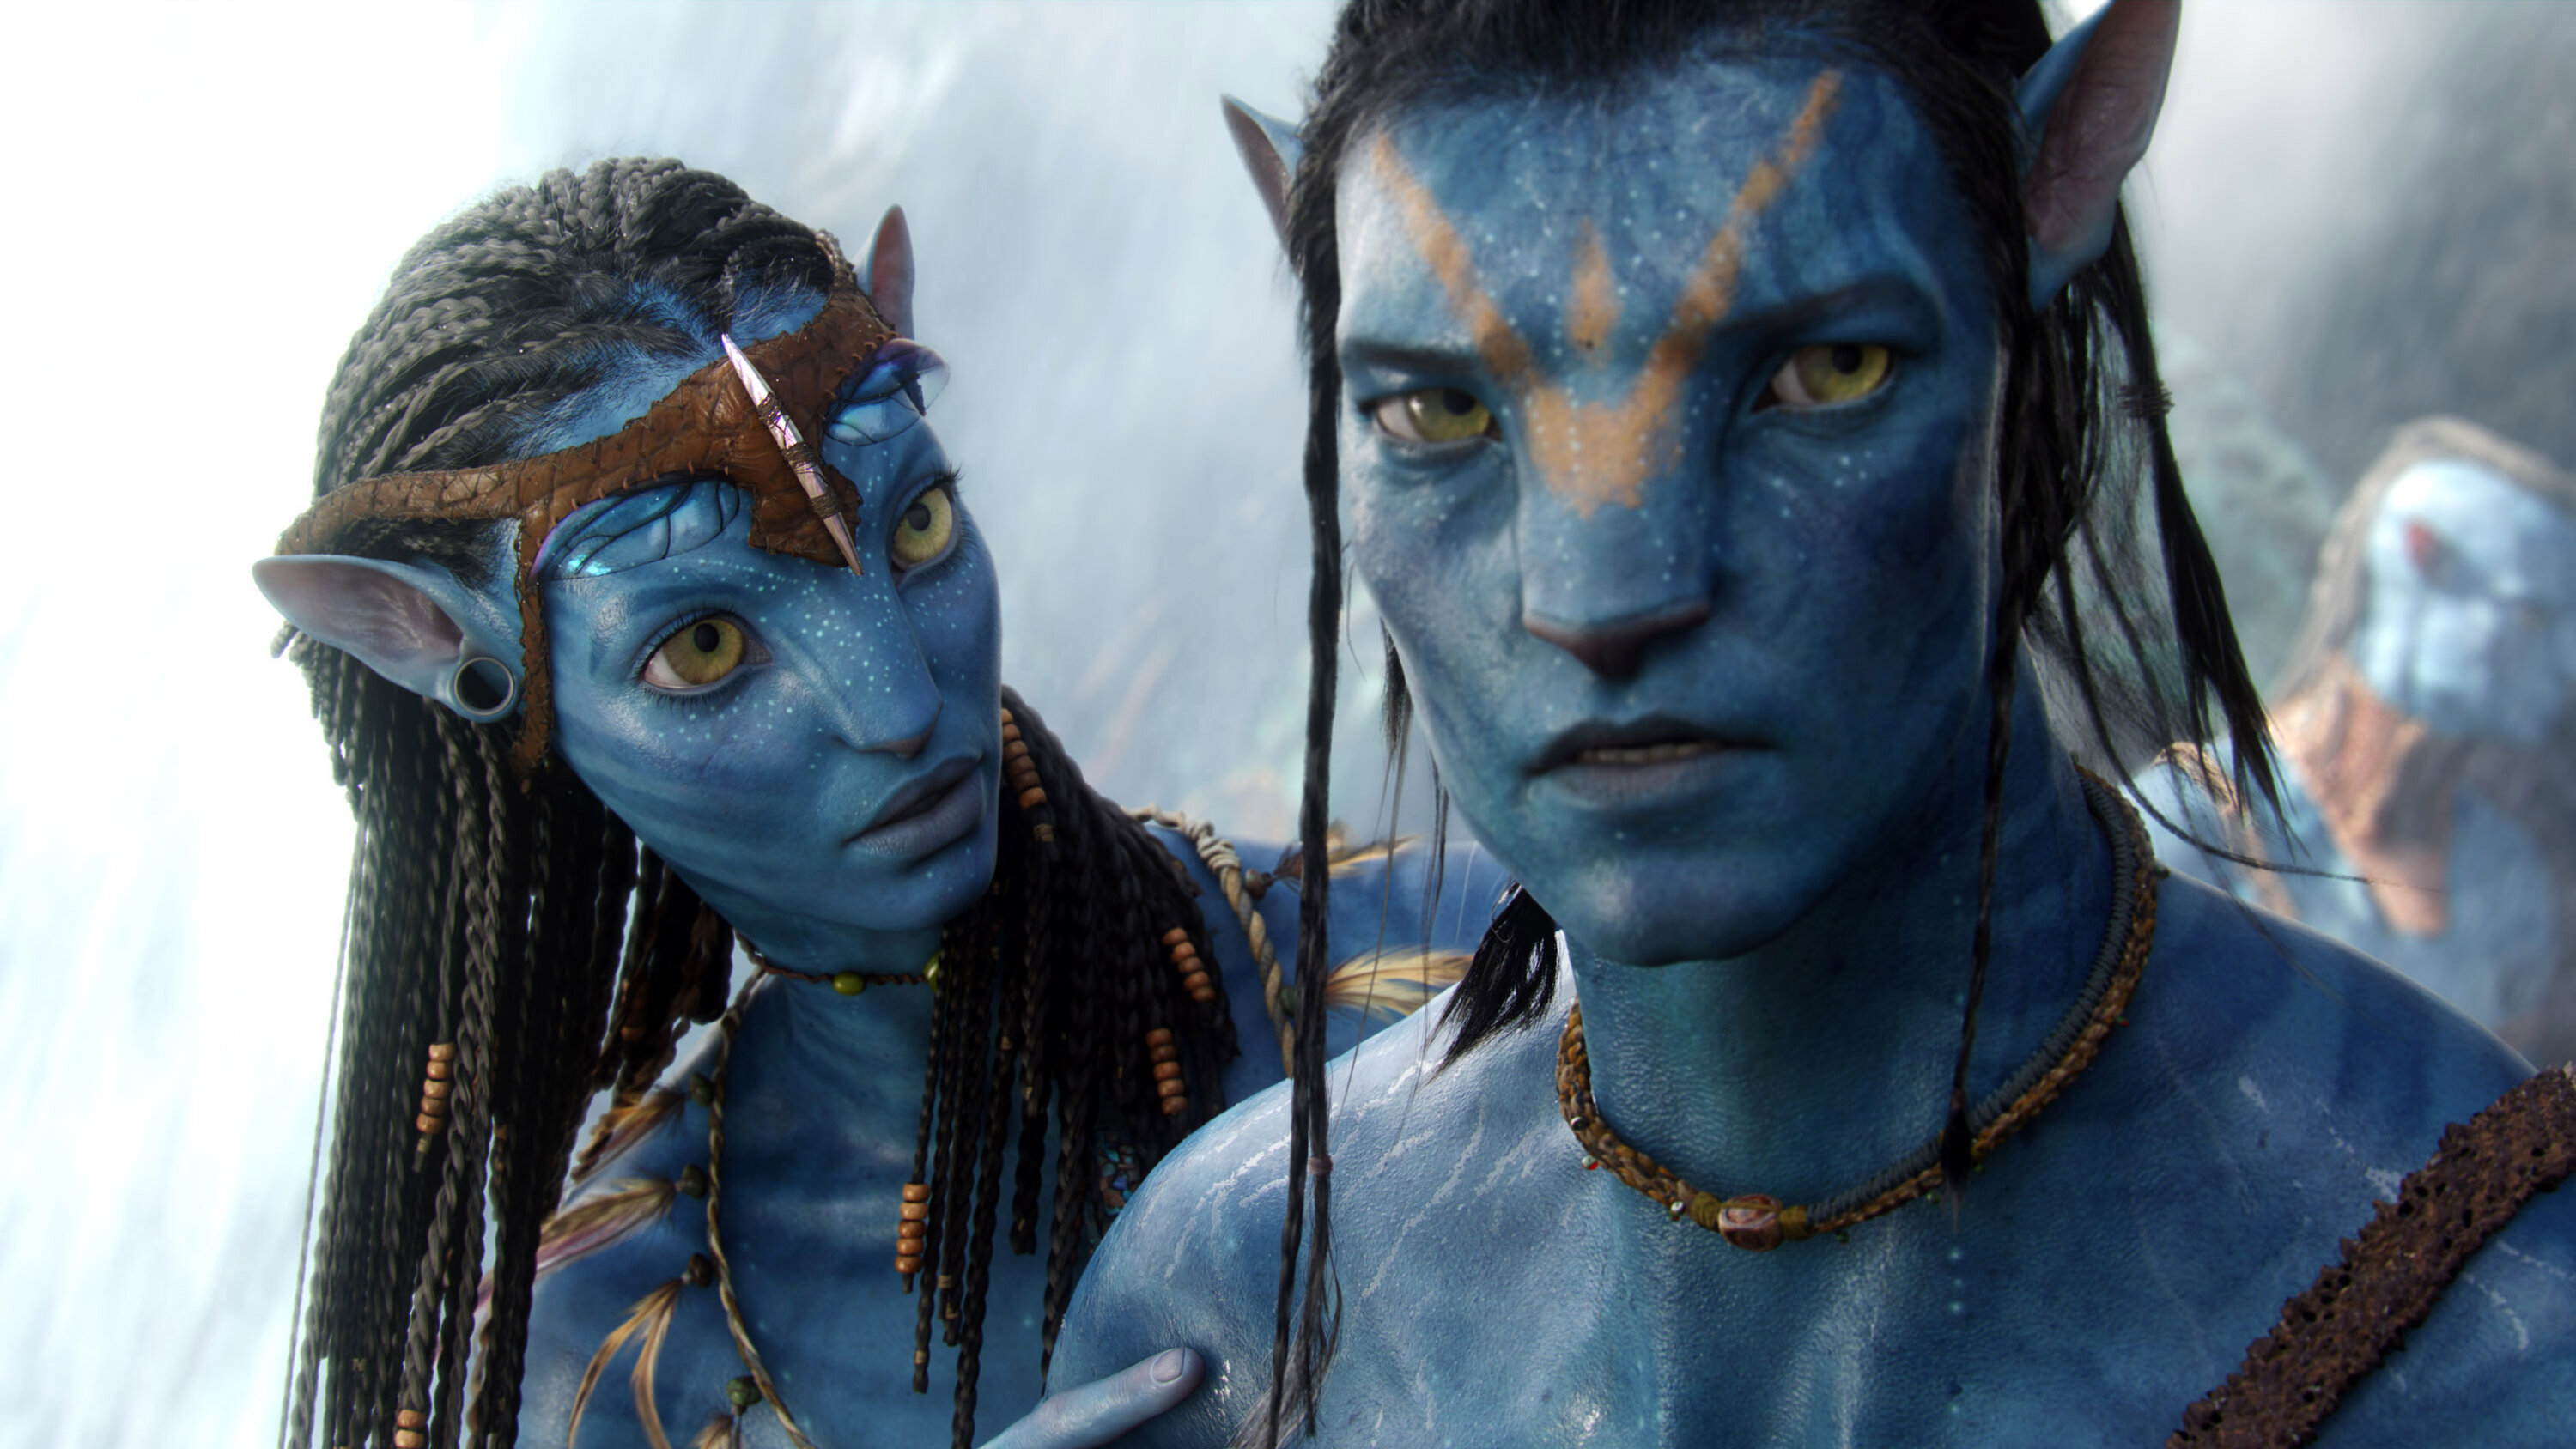 Avatar returns to theaters, but has its magic faded?